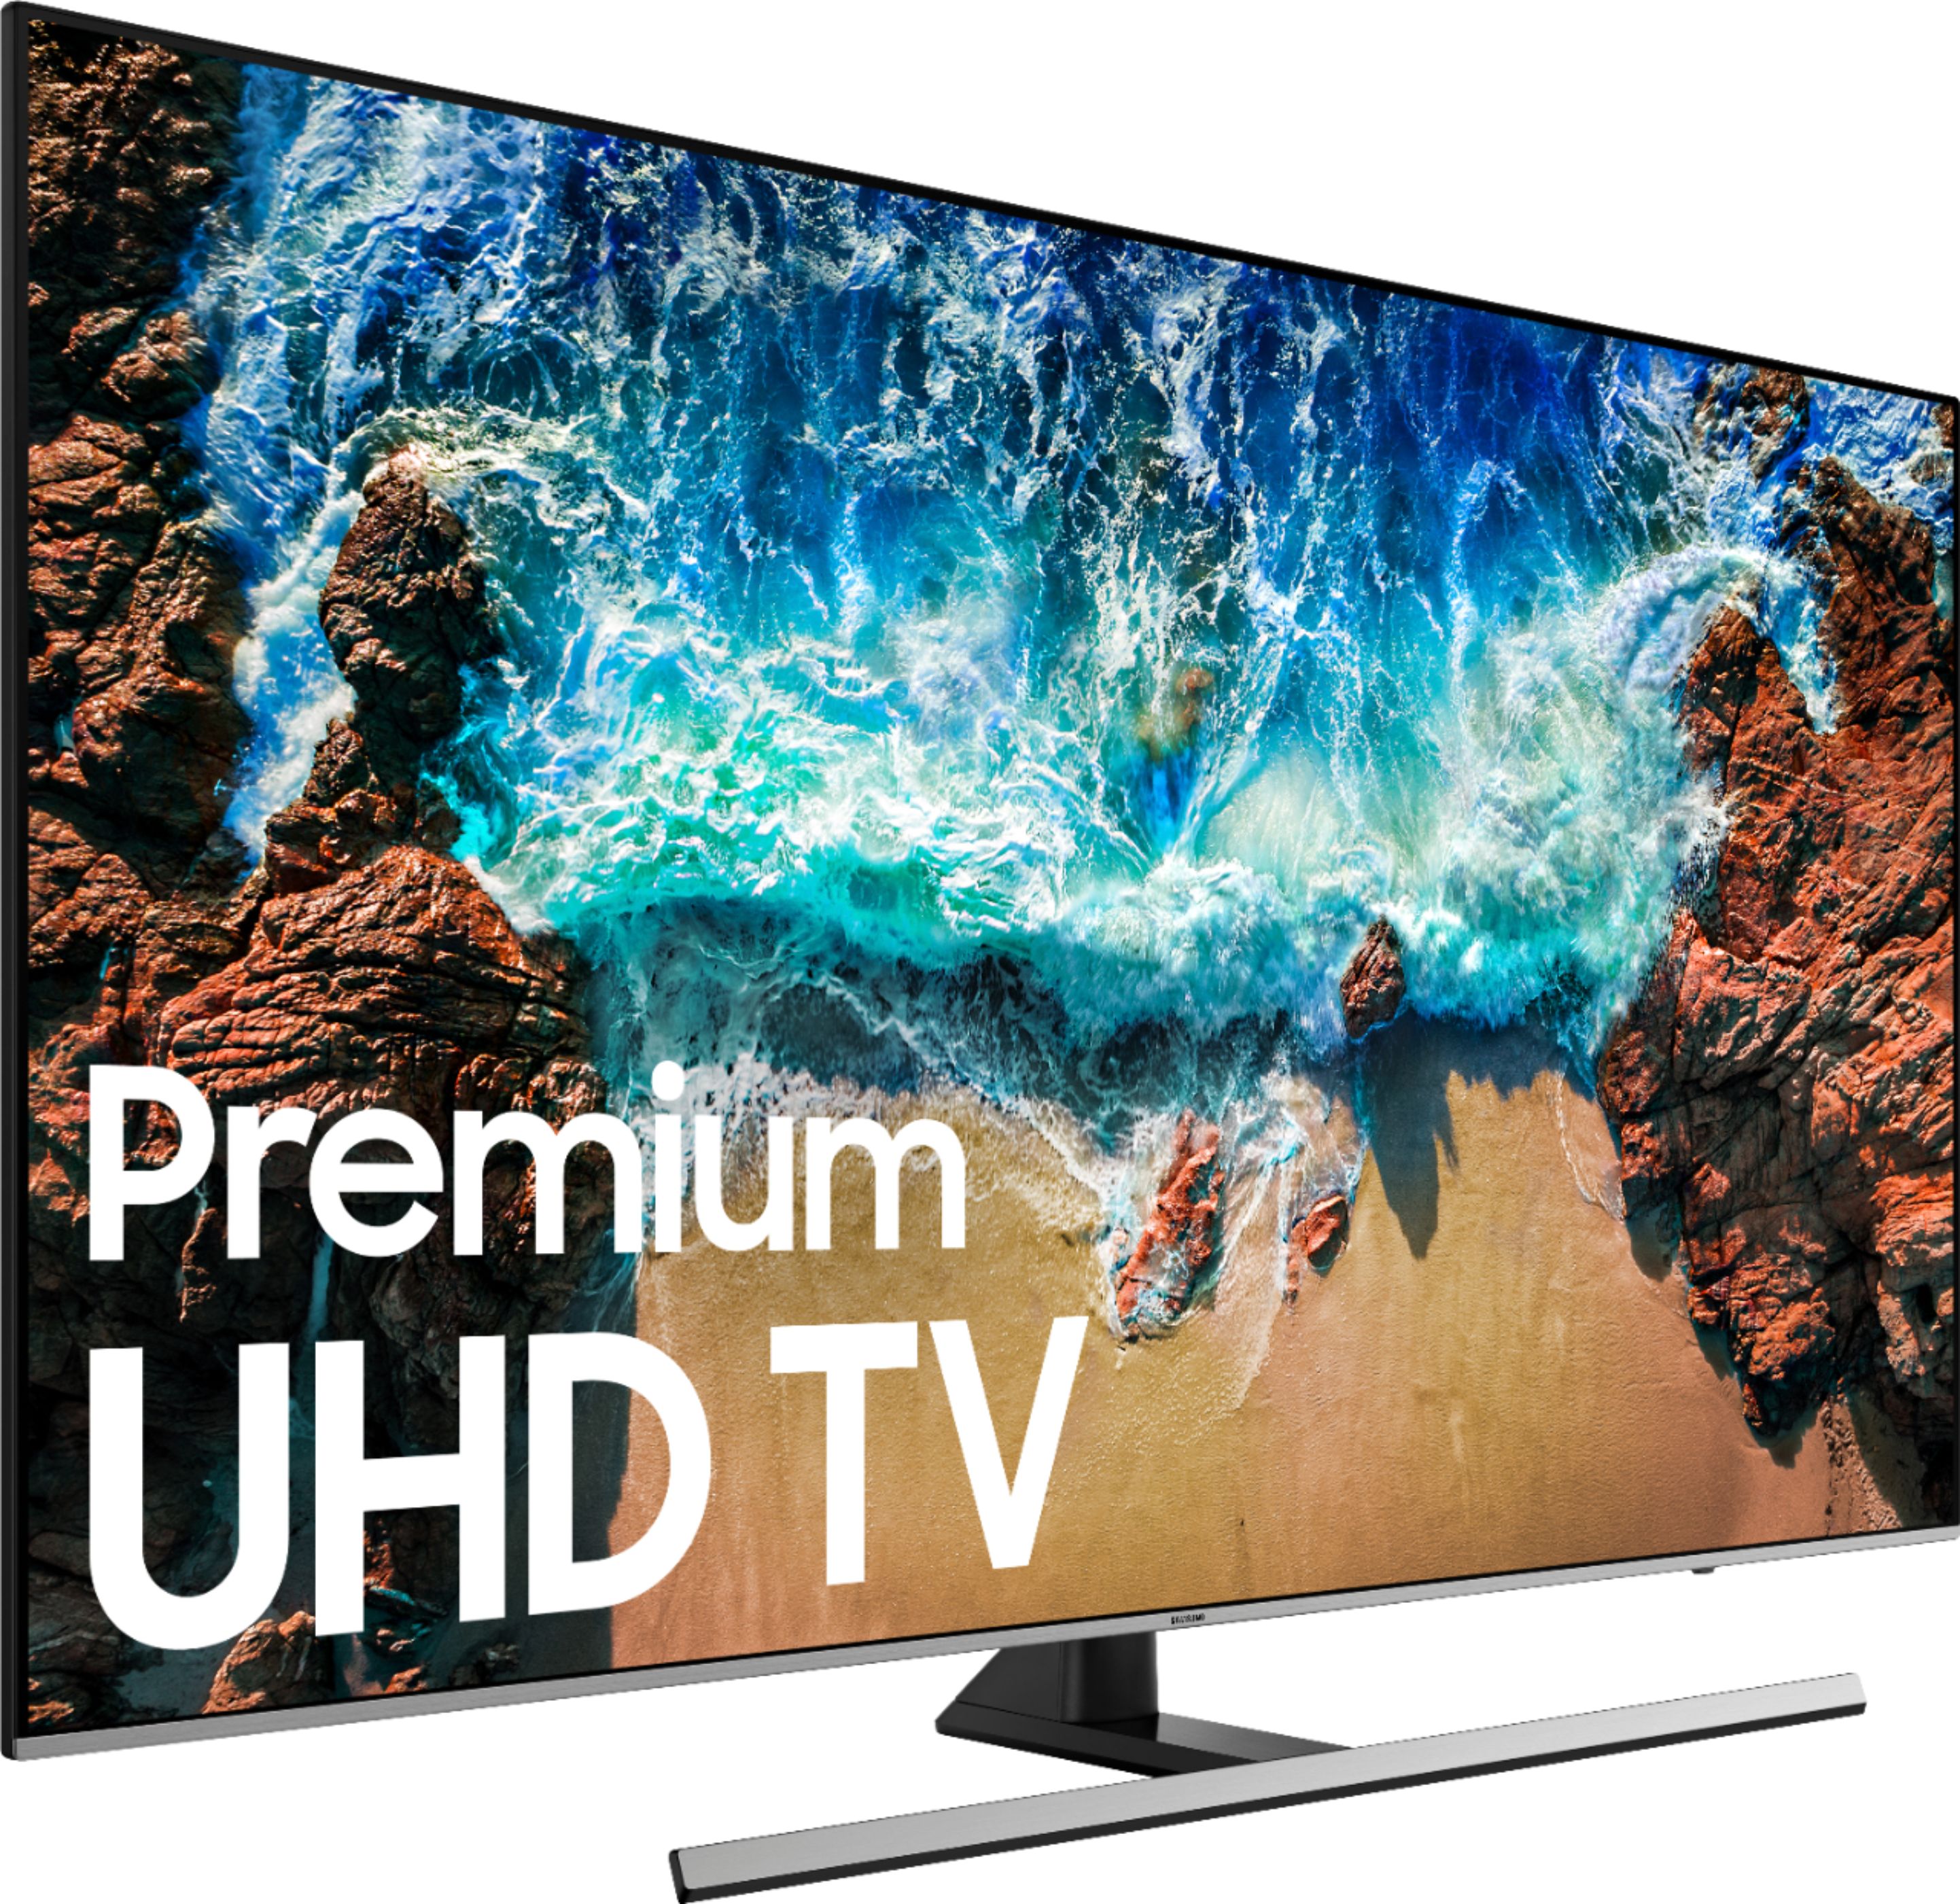 Customer Reviews Samsung 55 Class Led Nu8000 Series 2160p Smart 4k Uhd Tv With Hdr 1553